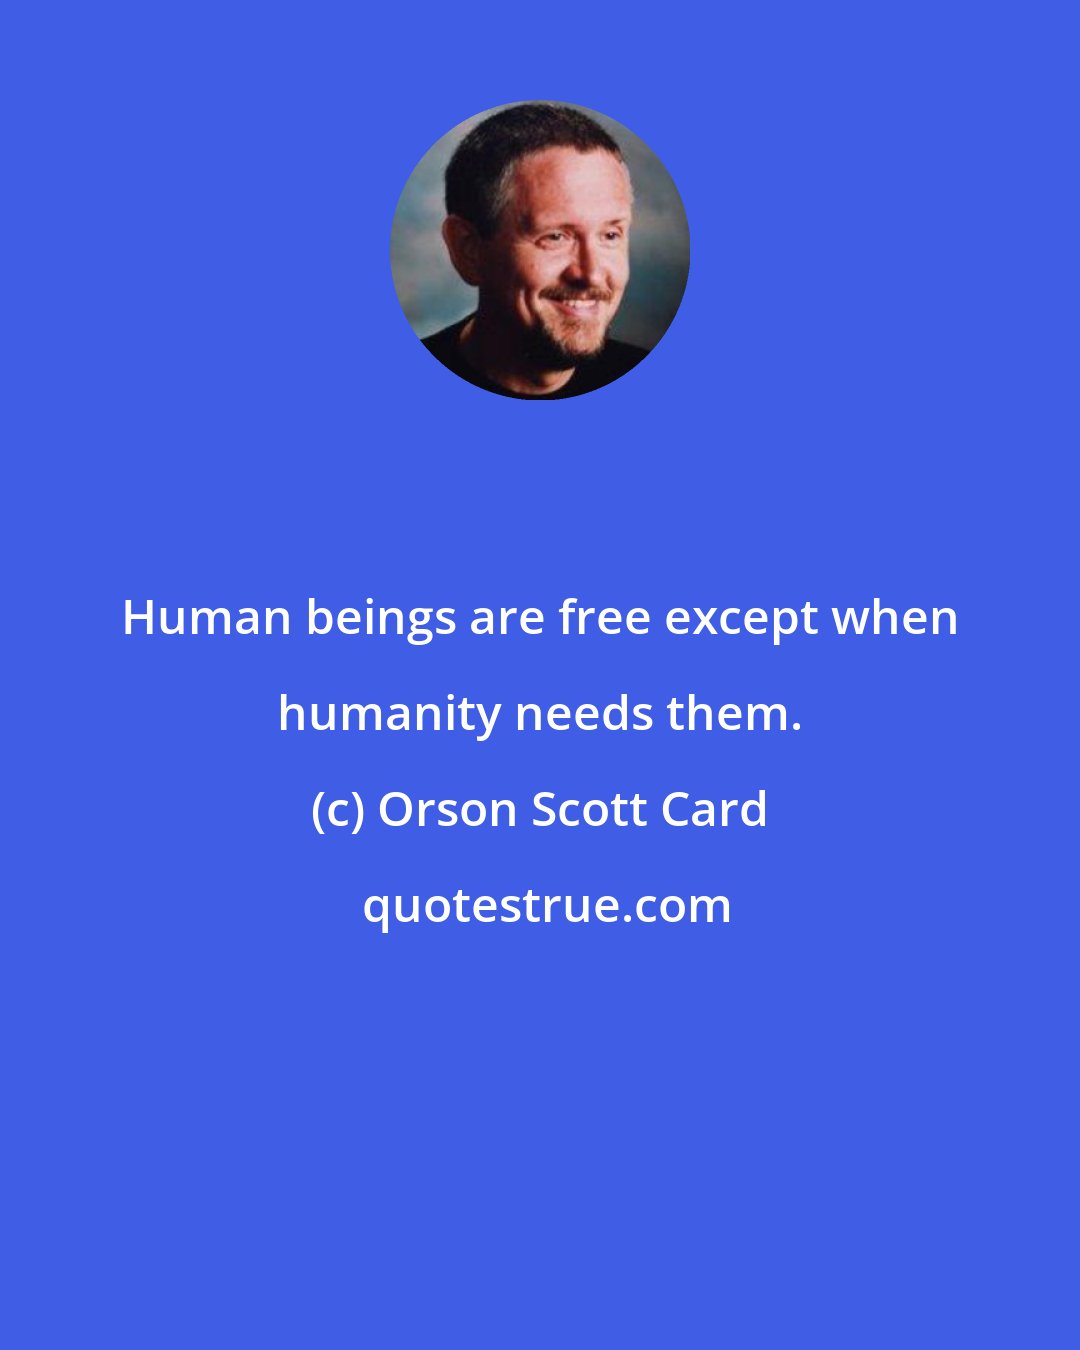 Orson Scott Card: Human beings are free except when humanity needs them.